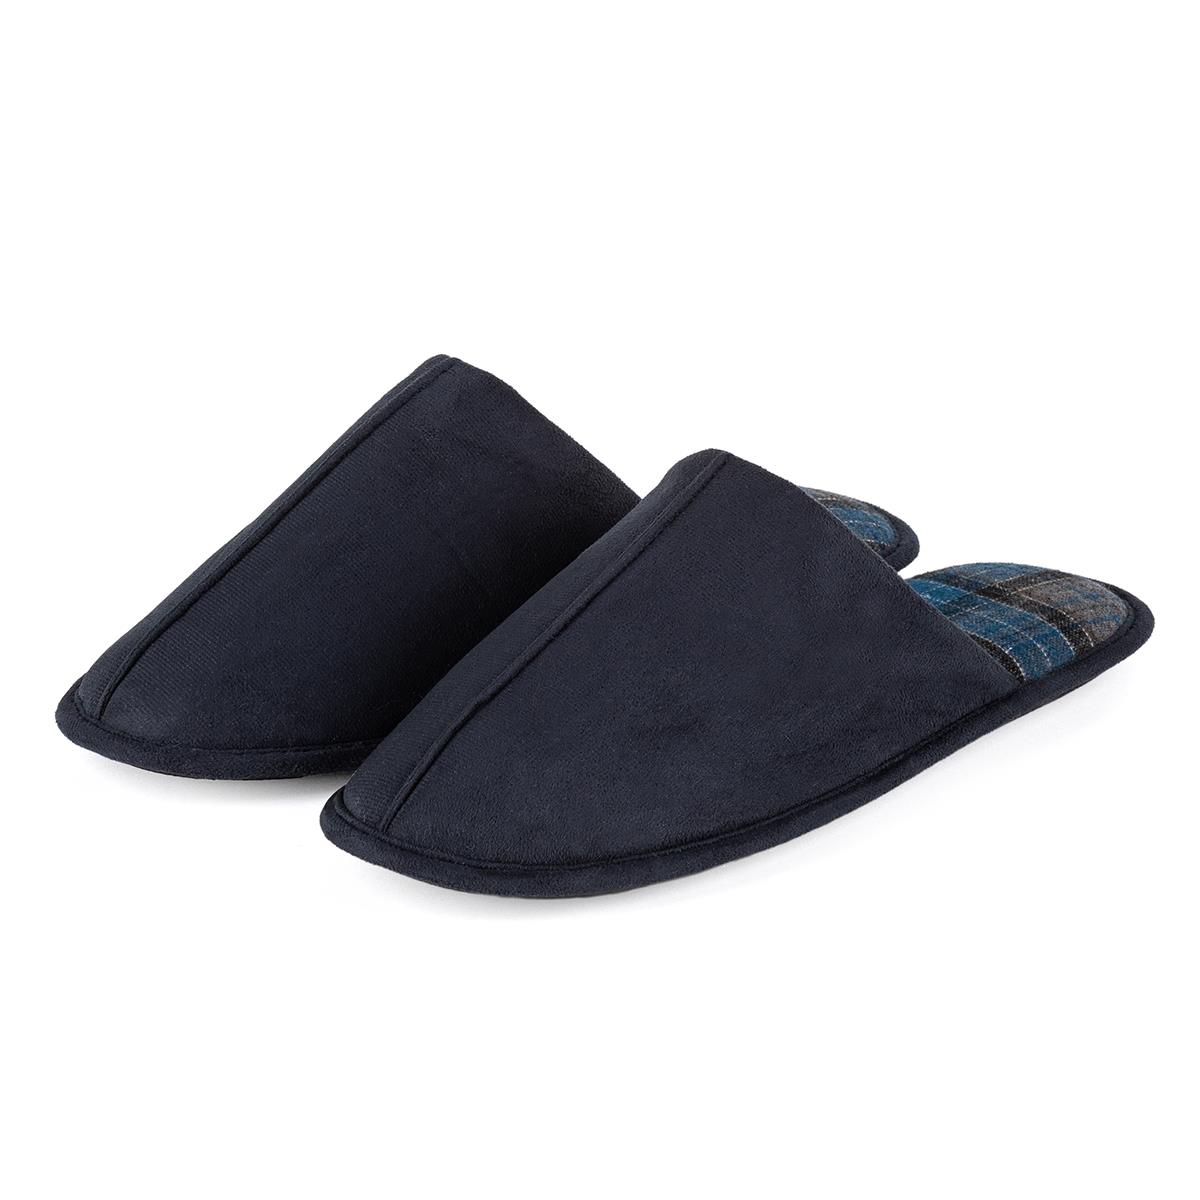 Totes Toasties Men's Mule Slippers With Durable Sole and Memory Foam Size 10-11 